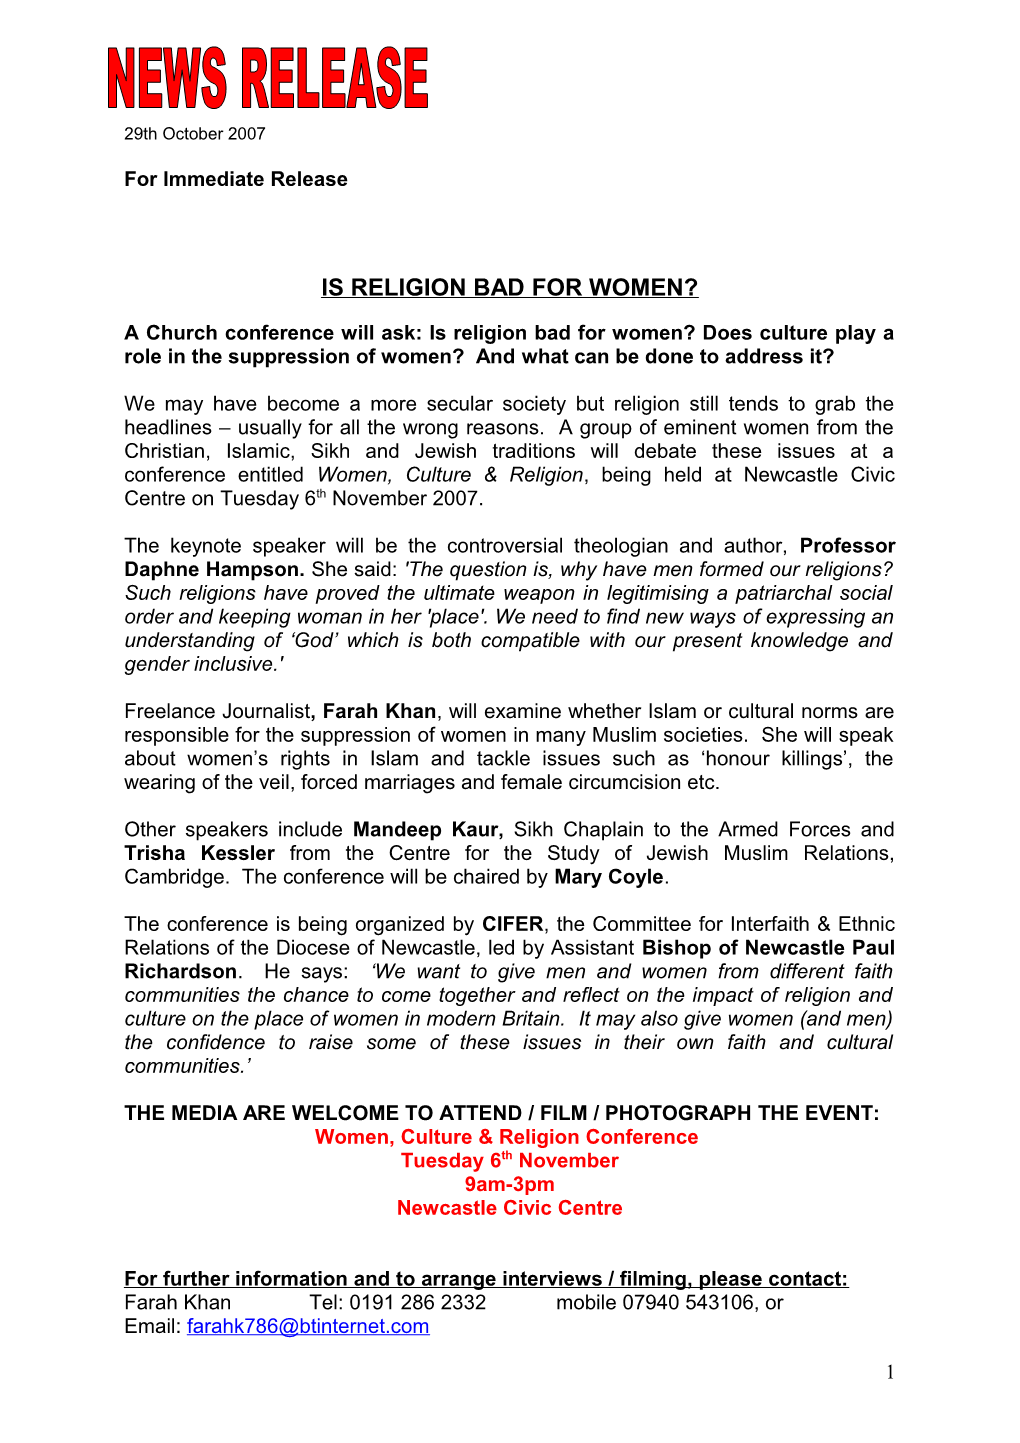 Is Religion Bad for Women?